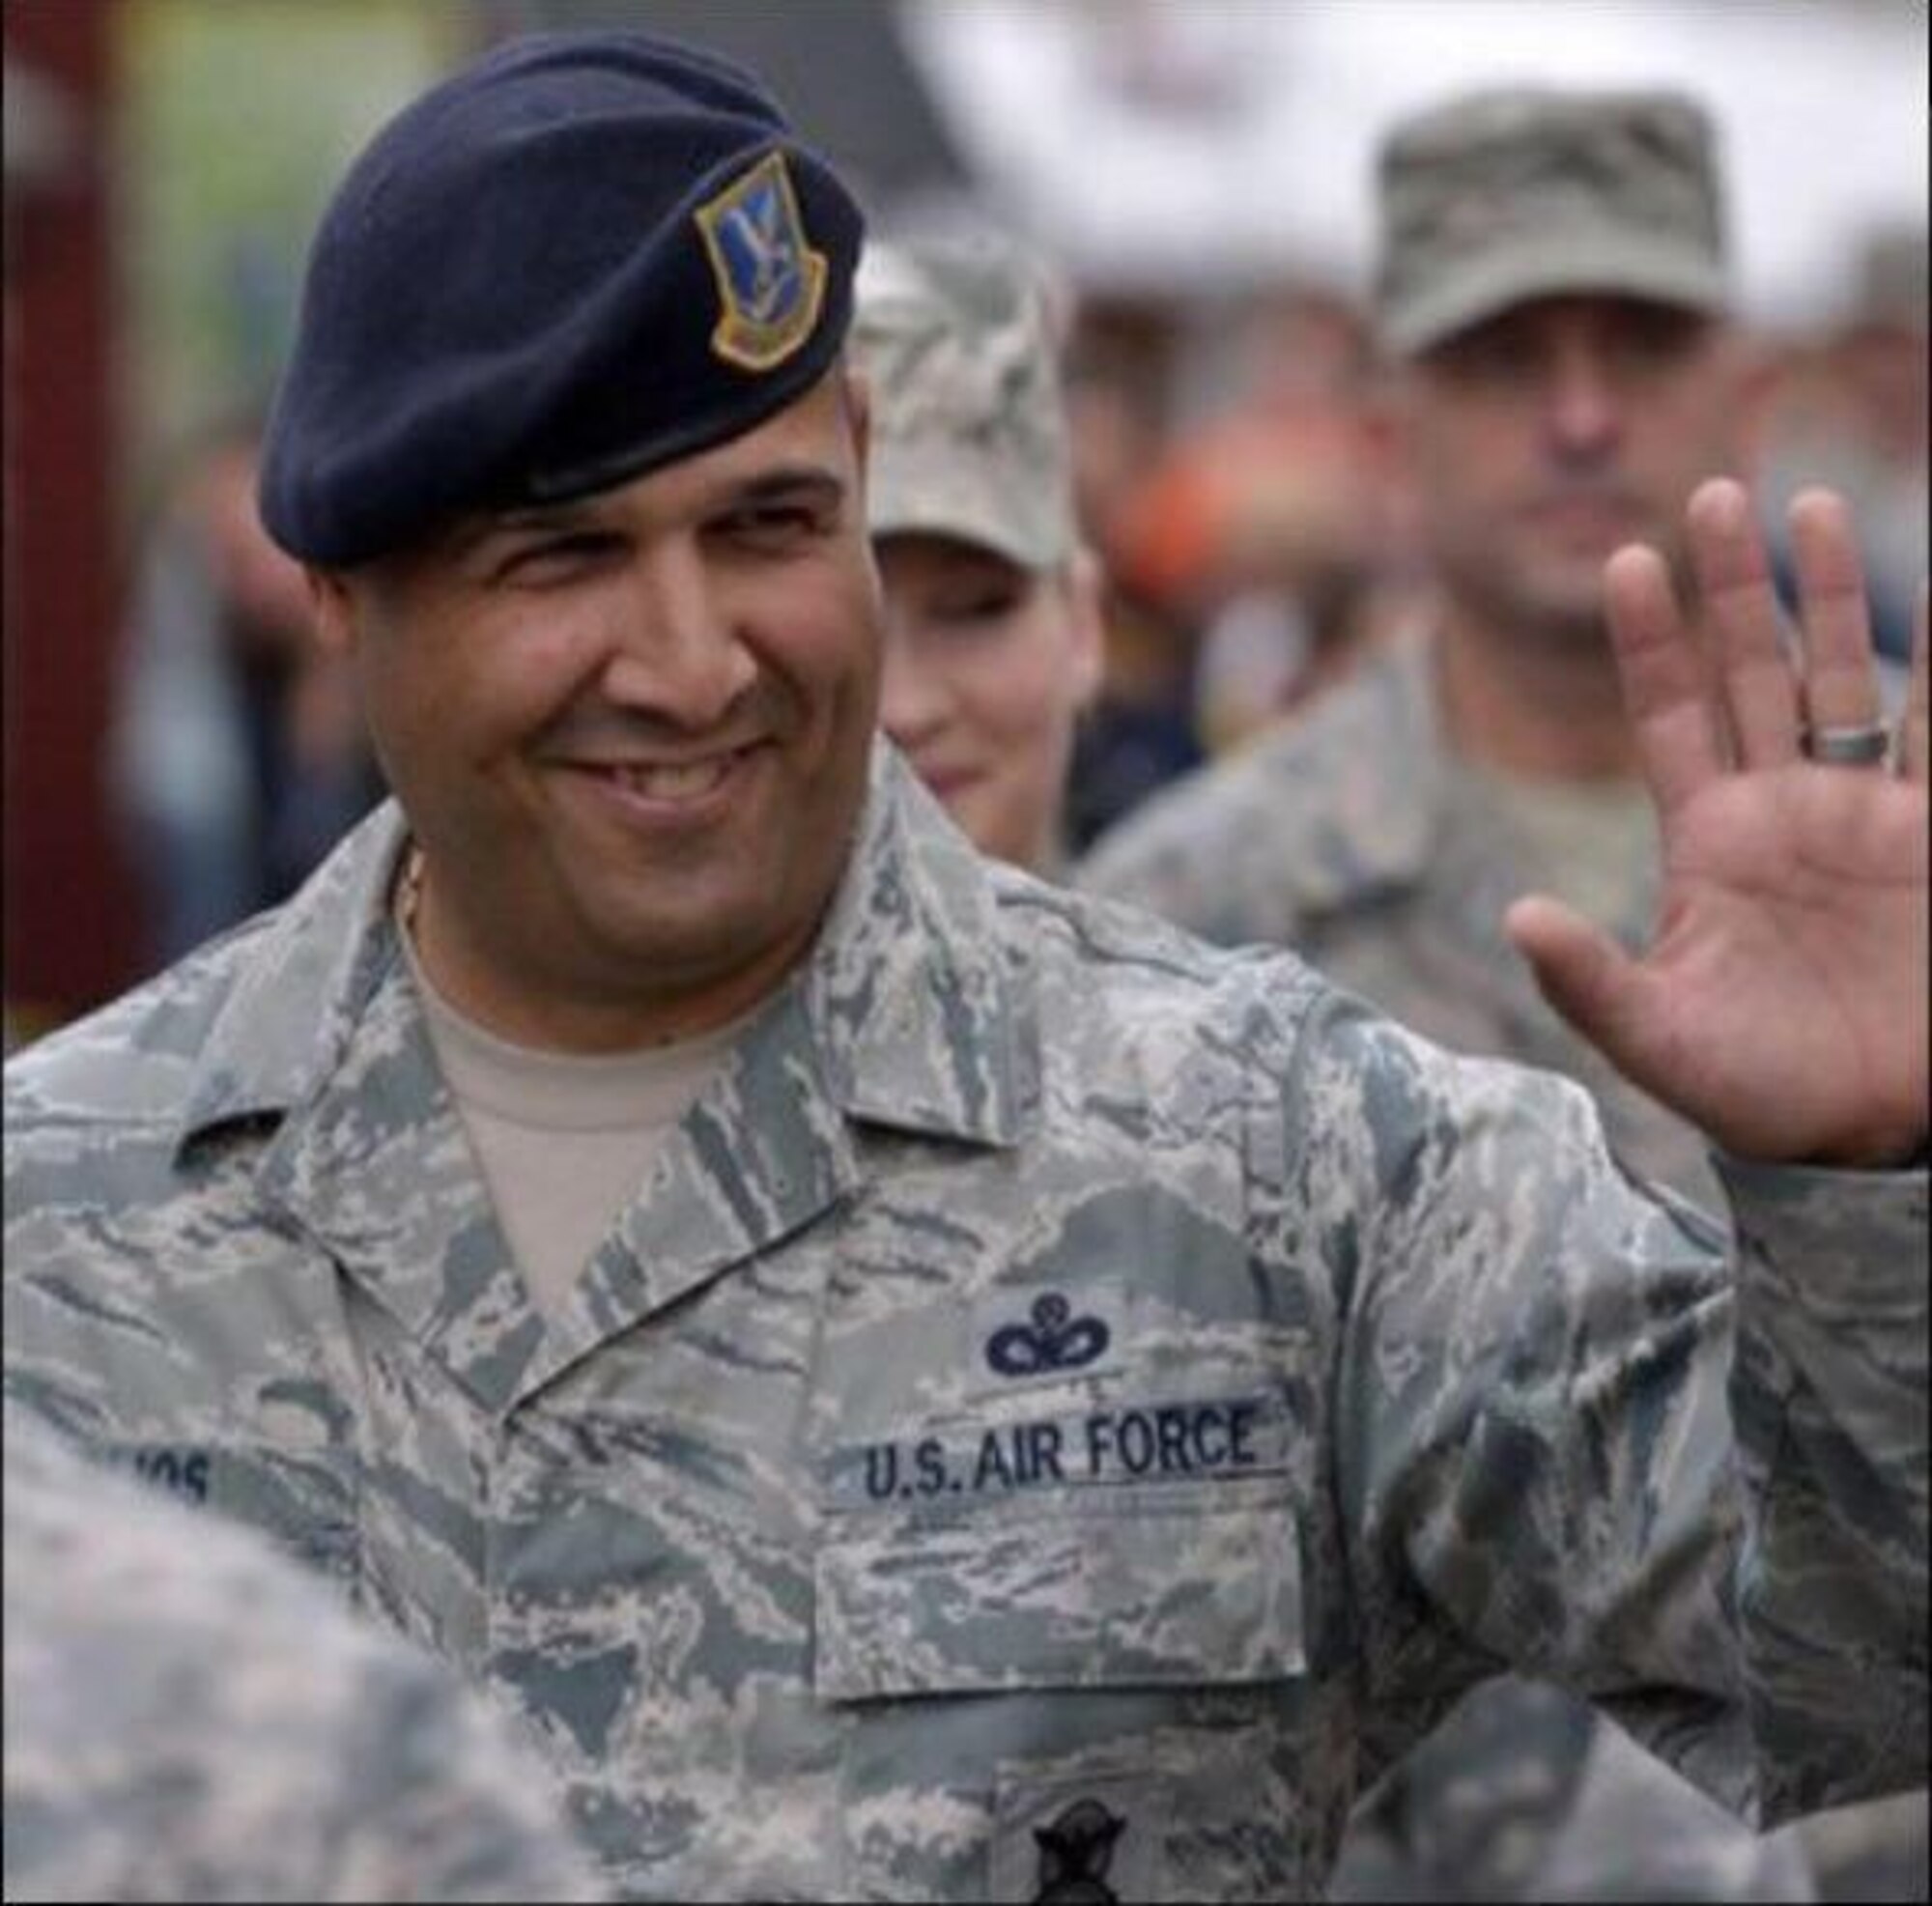 Senior Master Sgt. (ret) Jose E. Rijos, is from Bayamon, Puerto Rico and joined the Air Force even though his family served in the Army. Growing up, his parents instilled the importance of family, following rules and having morals and making your own decisions. (Courtesy Photo)